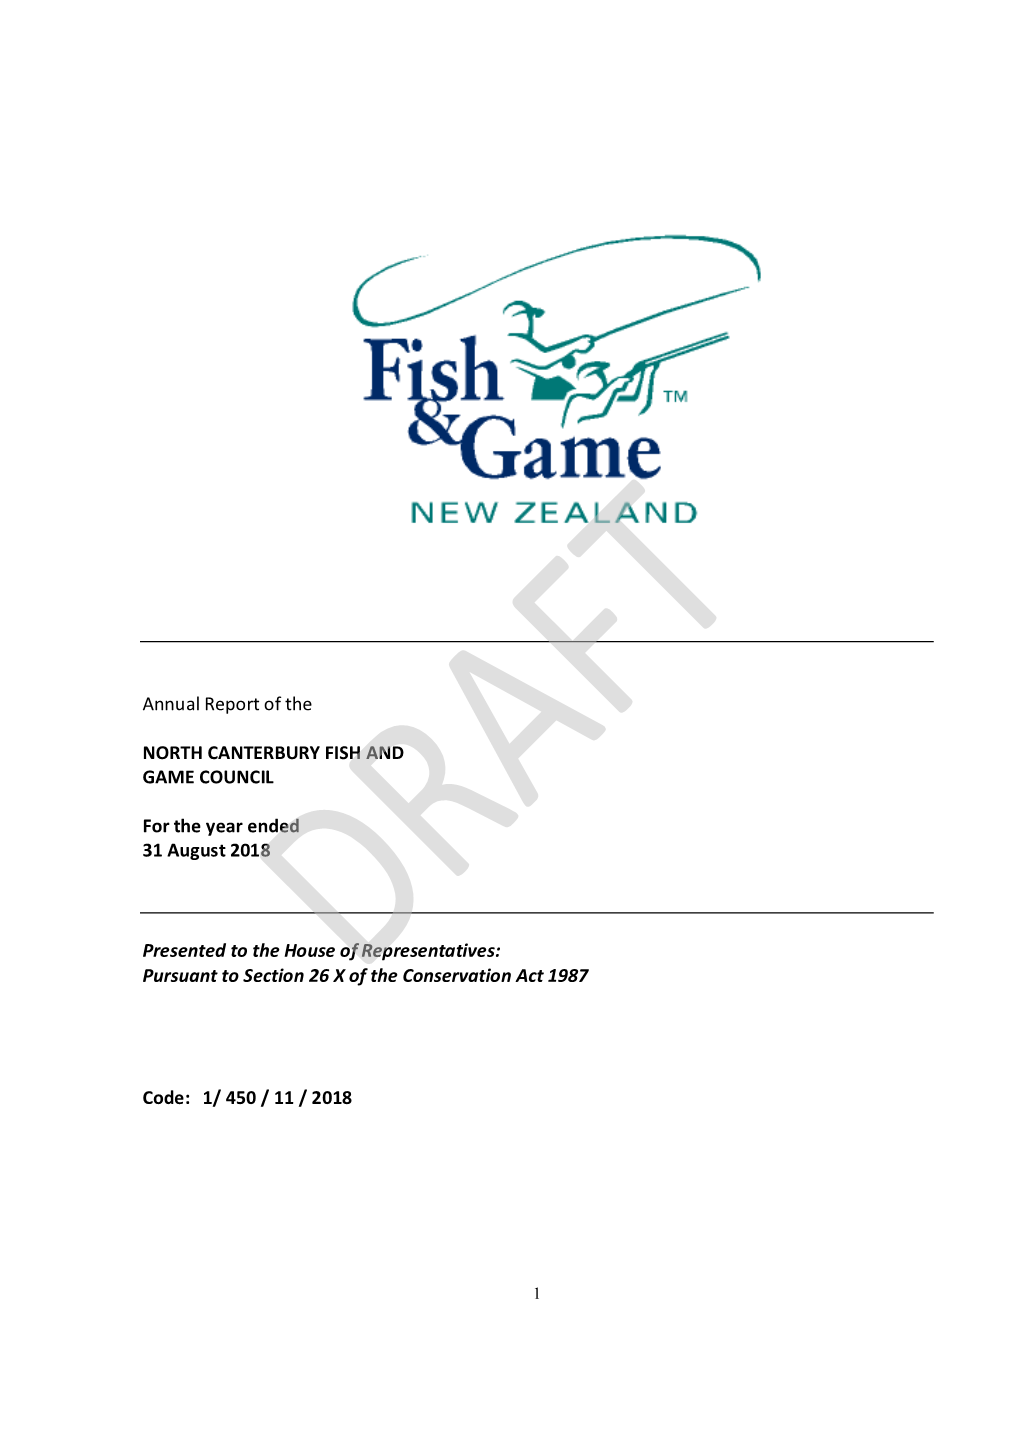 Annual Report of the NORTH CANTERBURY FISH and GAME